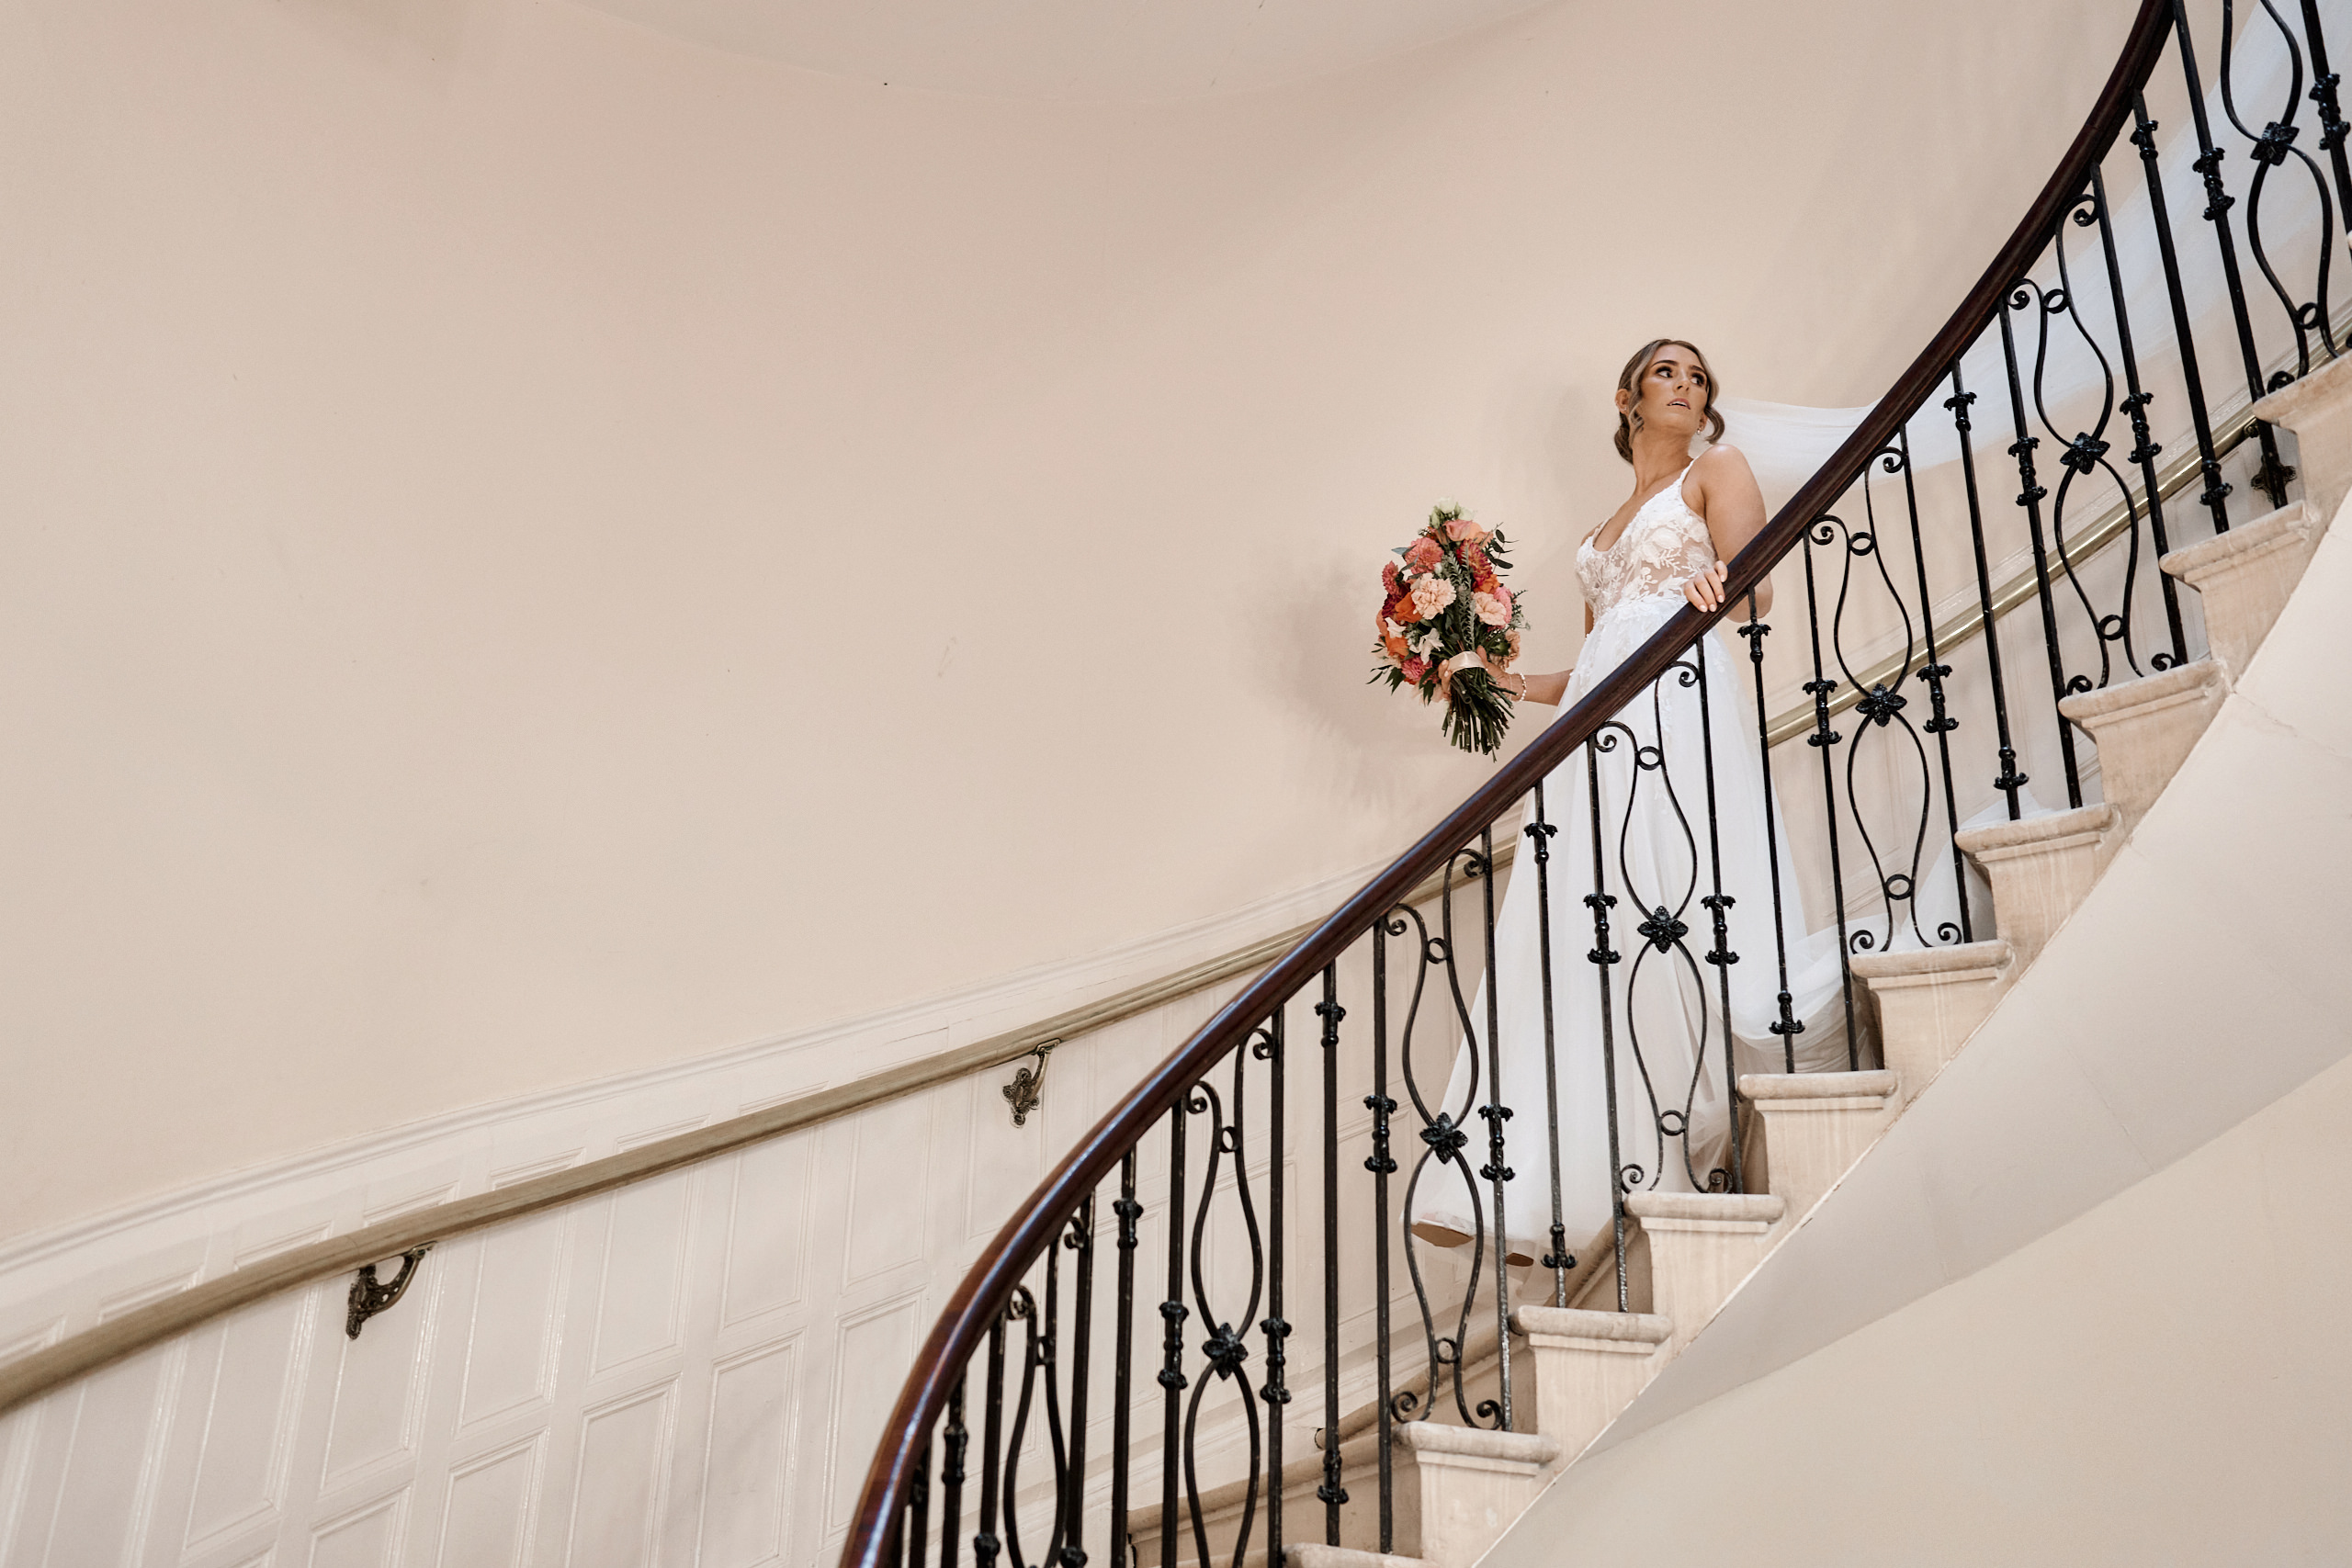 A bride standing on the stairs of a building.